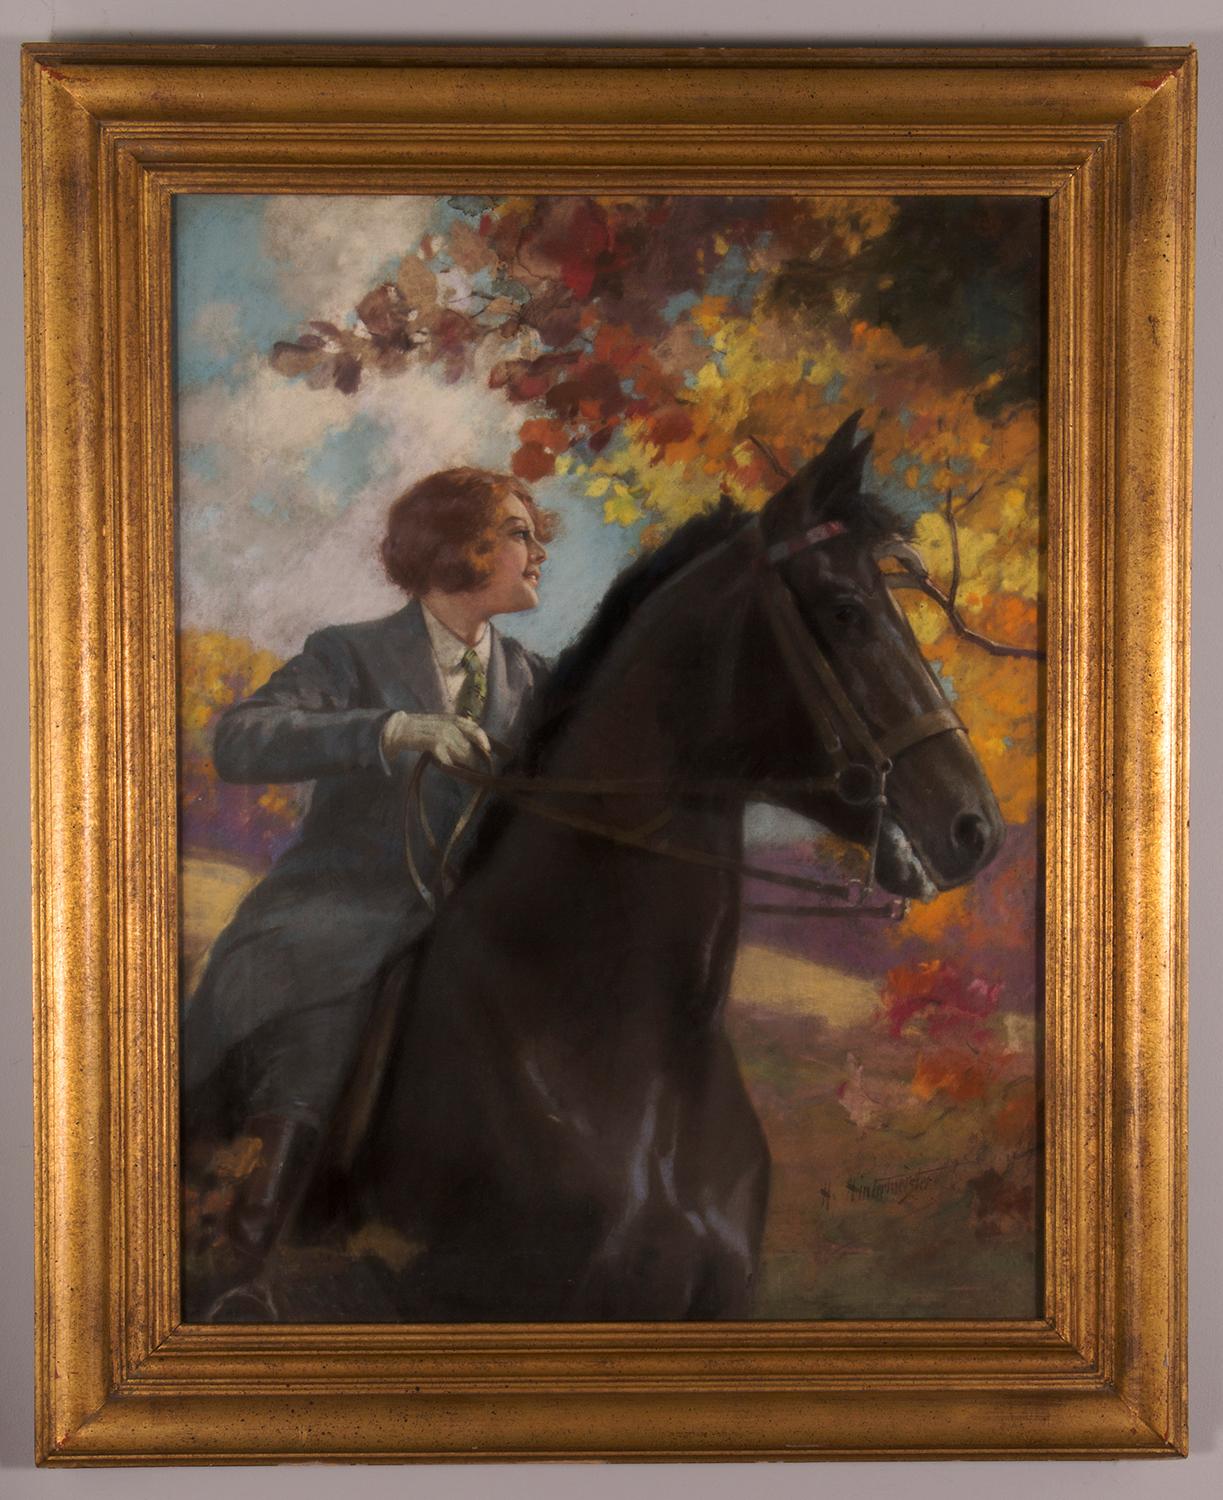 Woman on Horseback in Autumn - Painting by Henry Hintermeister